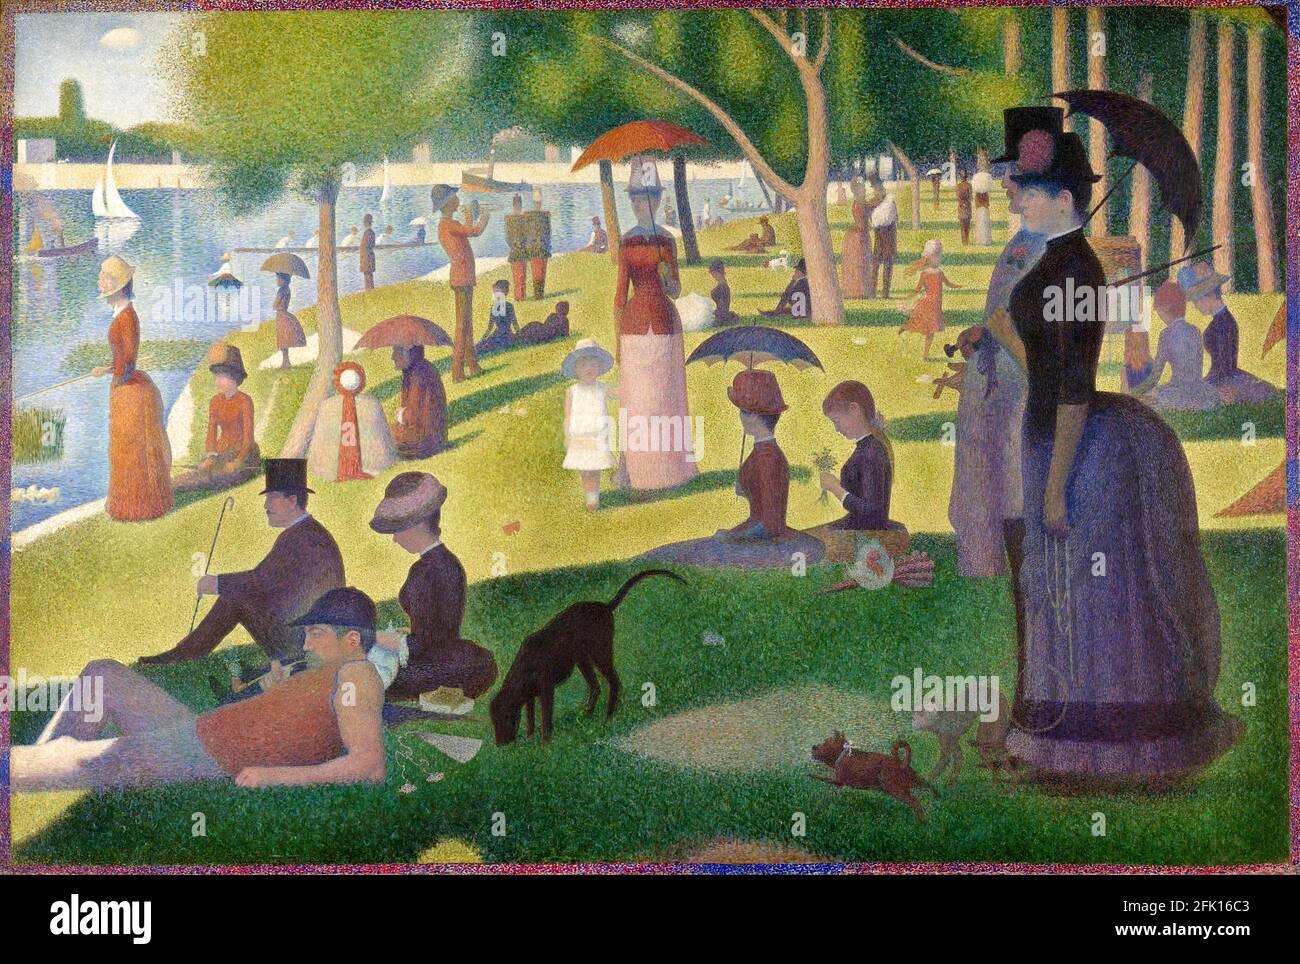 Georges Seurat, A Sunday Afternoon on the Island of La Grande Jatte, 1884 - 1886, oil on canvas, Art Institute of Chicago. Stock Photo